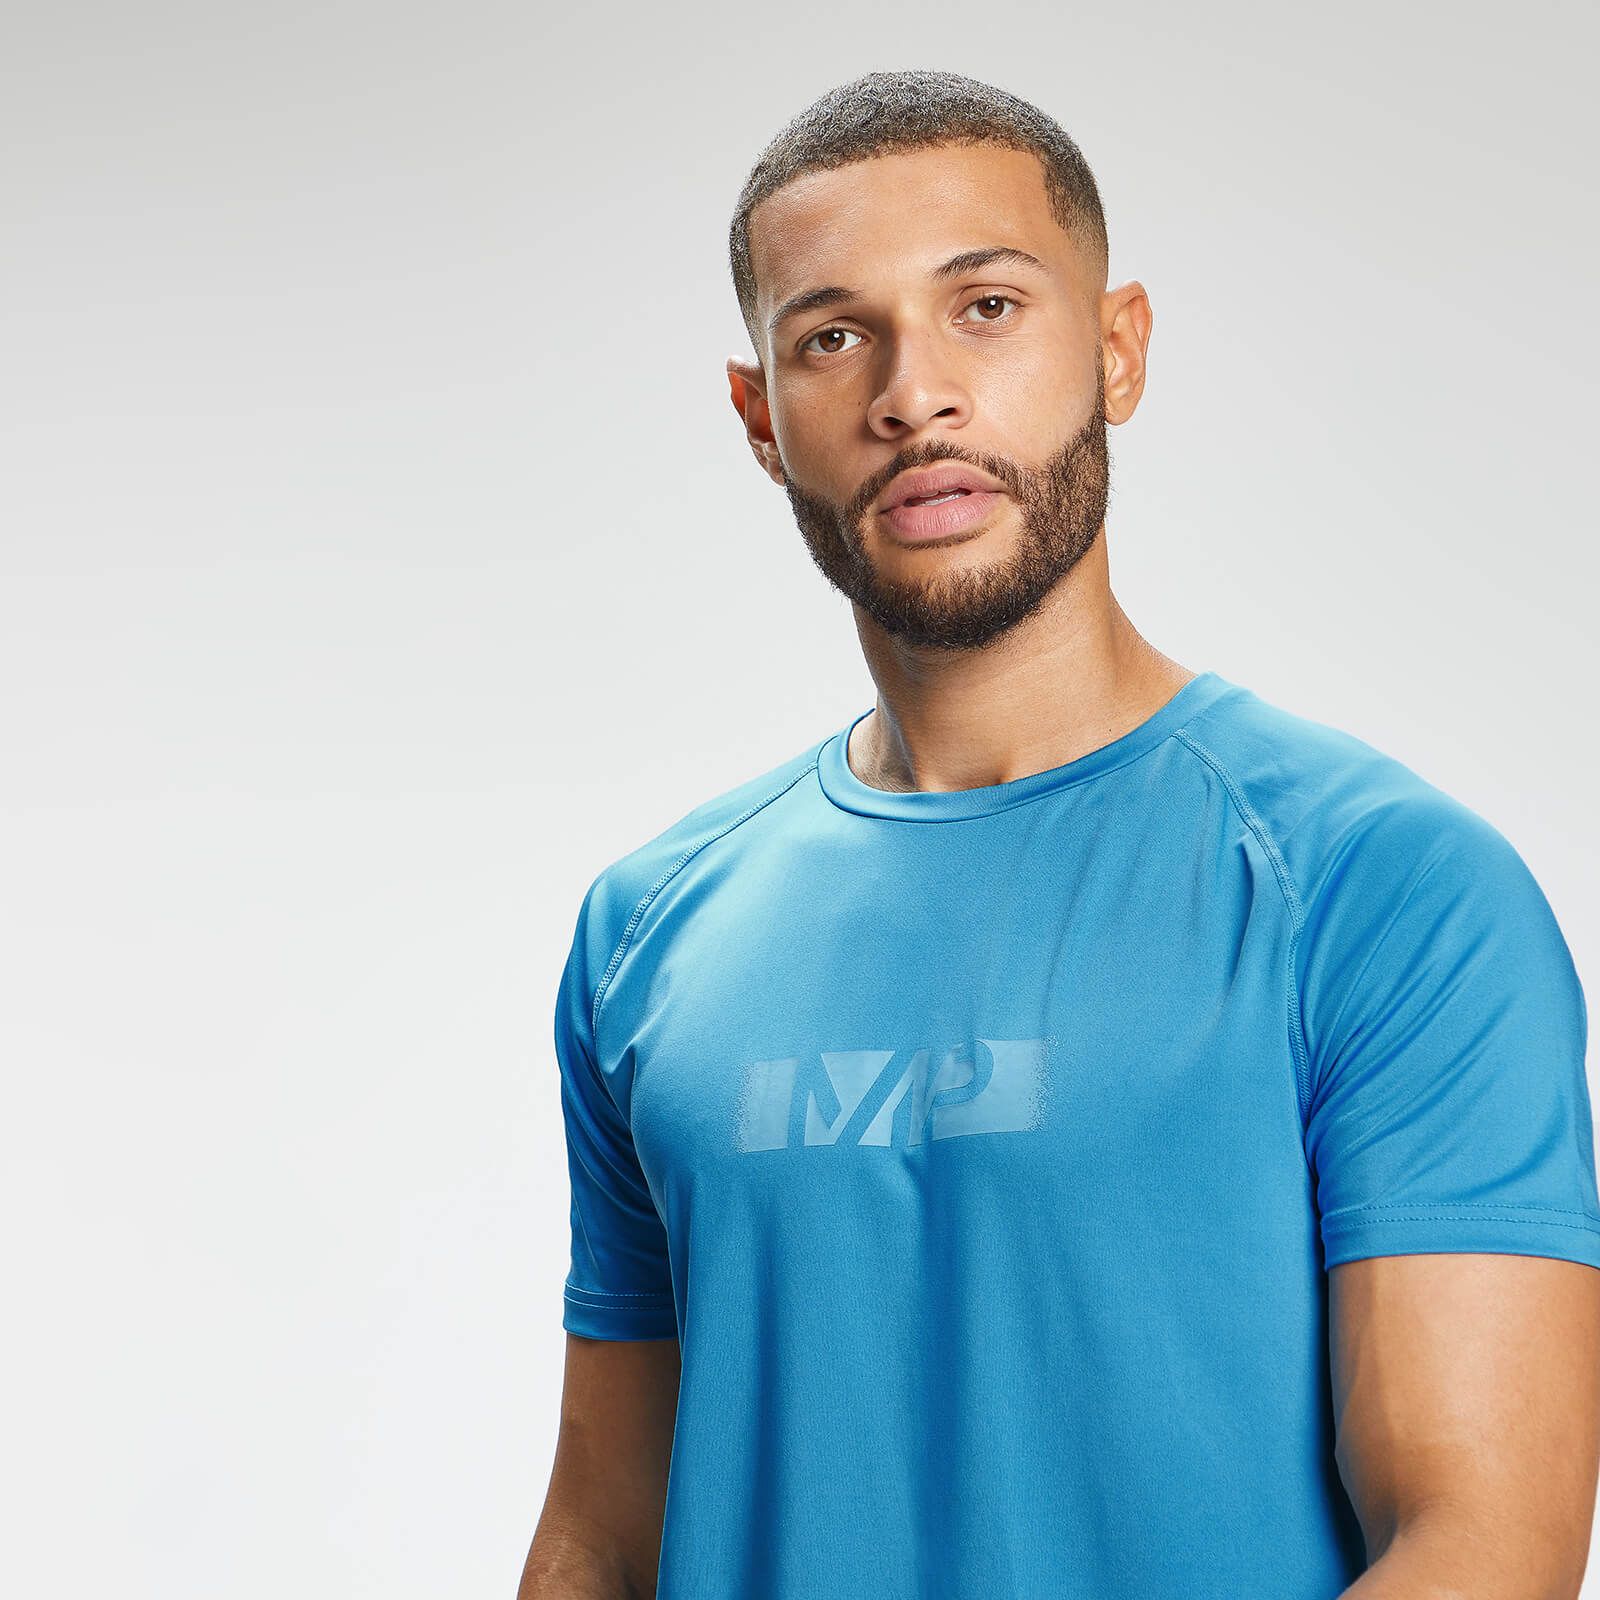 Complete your workout wardrobe with our Graphic Training pieces. Designed for the gym floor, they offer everything you need for everyday sessions. The Graphic Training T-shirt is an essential style, updated with a graphic print and MP logo to the chest.